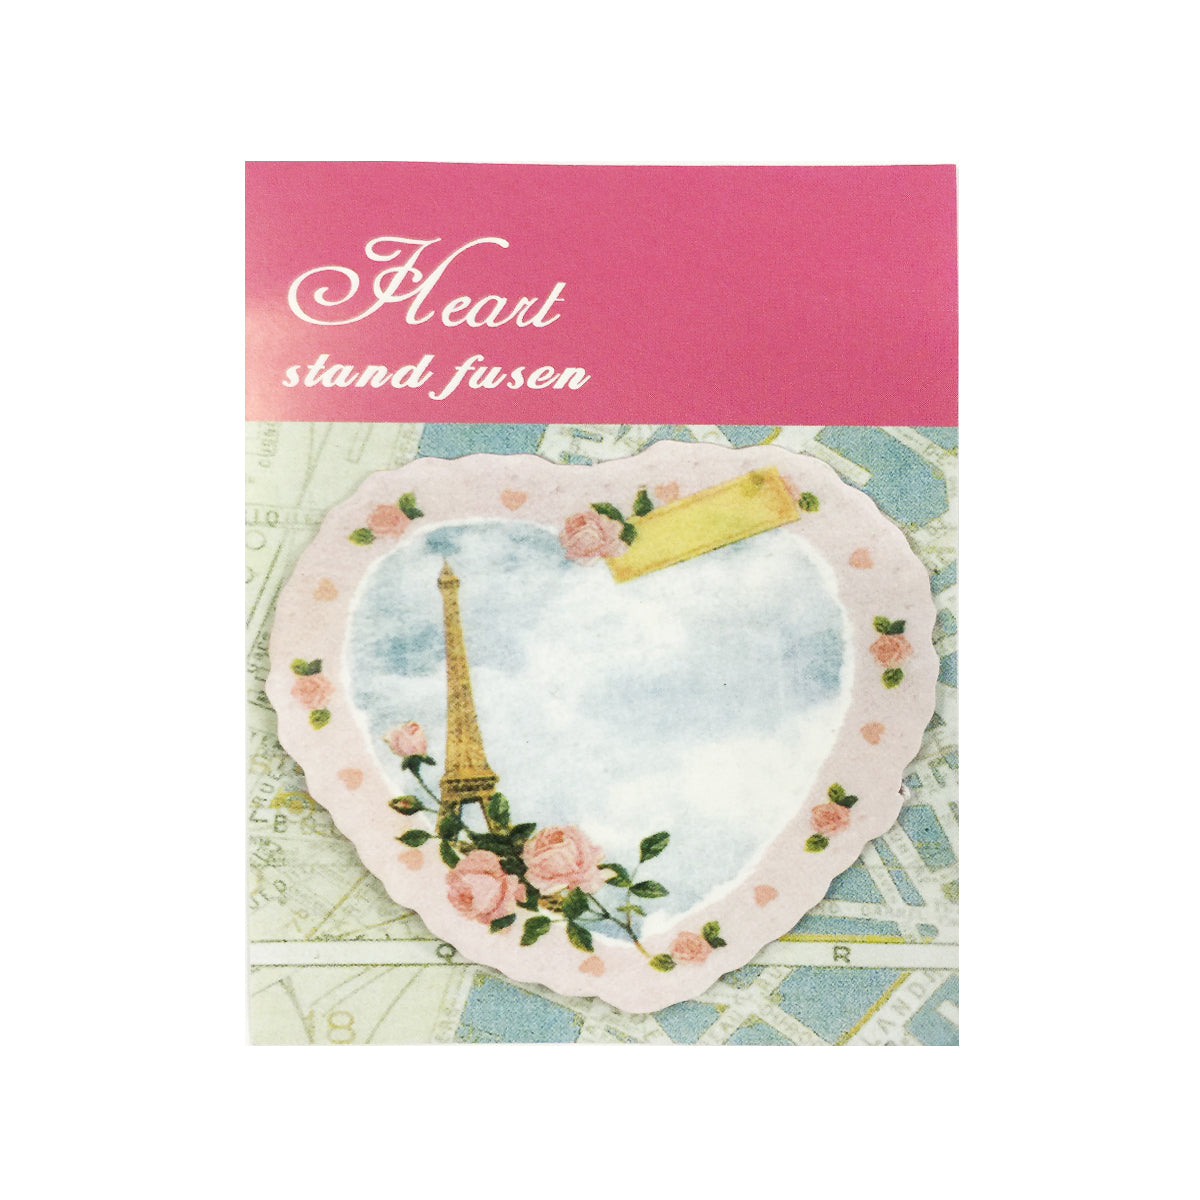 Wrapables Sweet Heart Memo Sticky Notes (Set of 4)